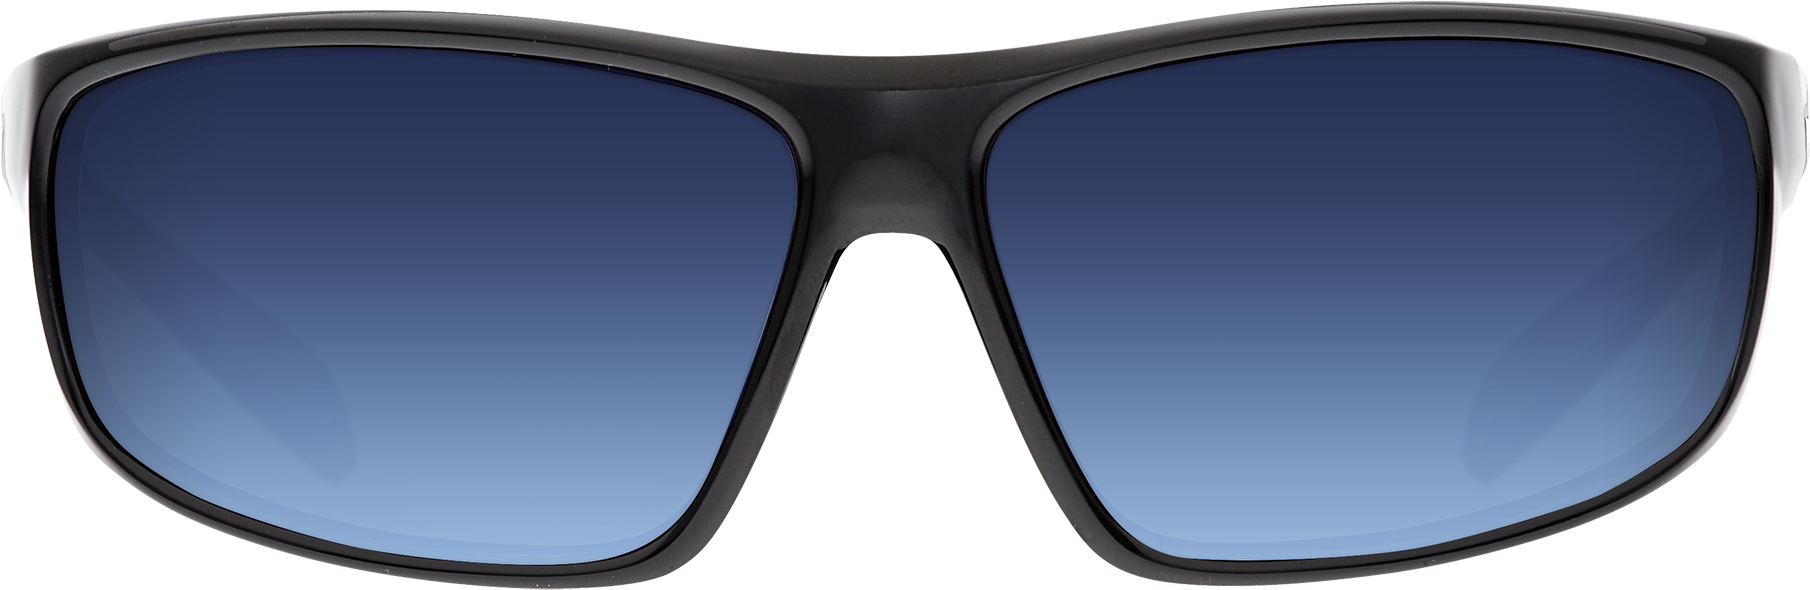 Black Aviator Sunglasses Product View PNG